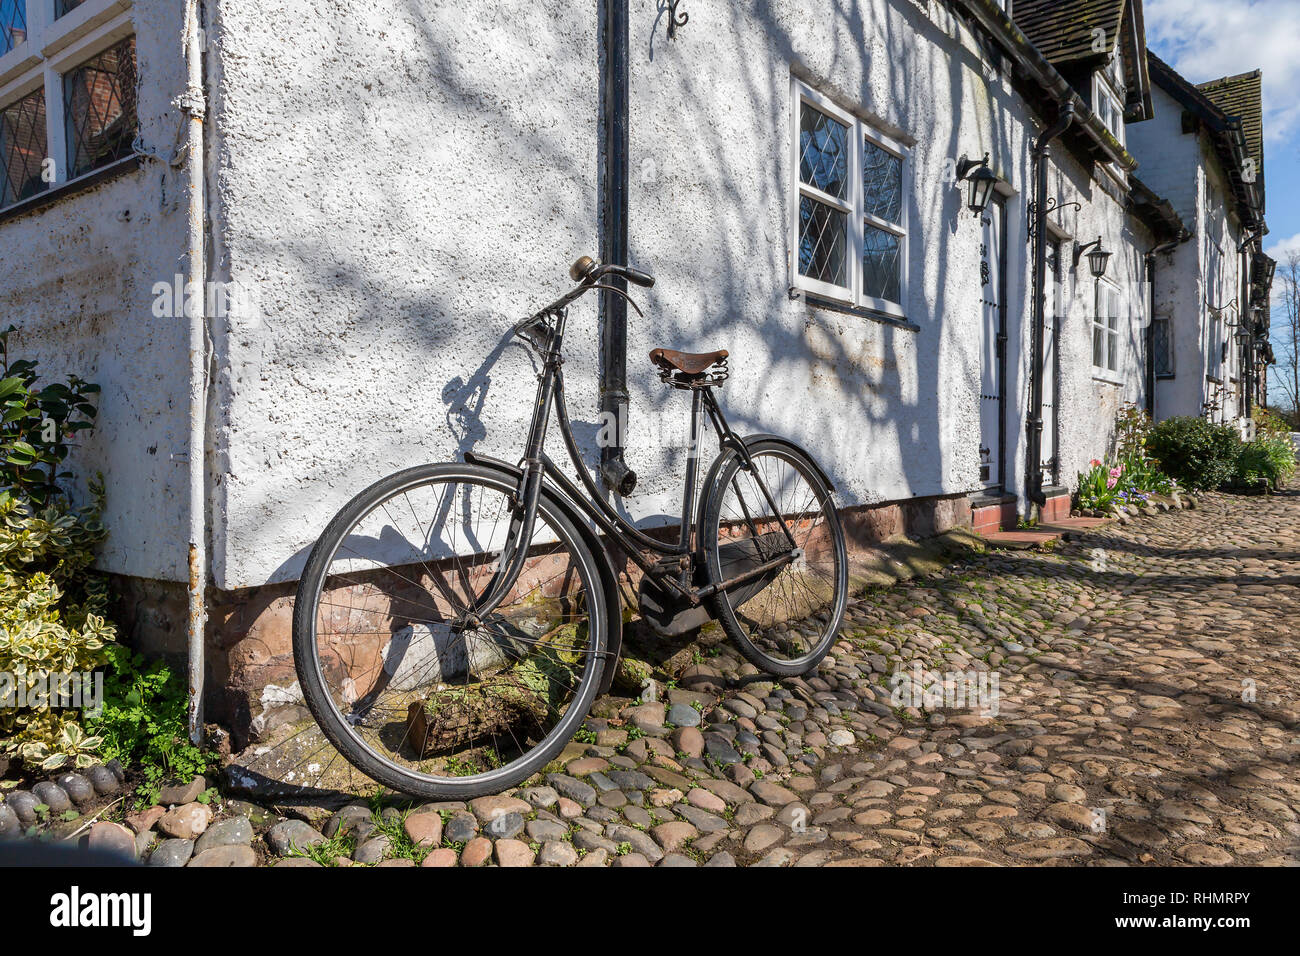 05 April 2018 – A sunny day on the filmset of the TV Series ‘War of the Worlds’ in Great Budworth, Cheshire, England, UK Stock Photo